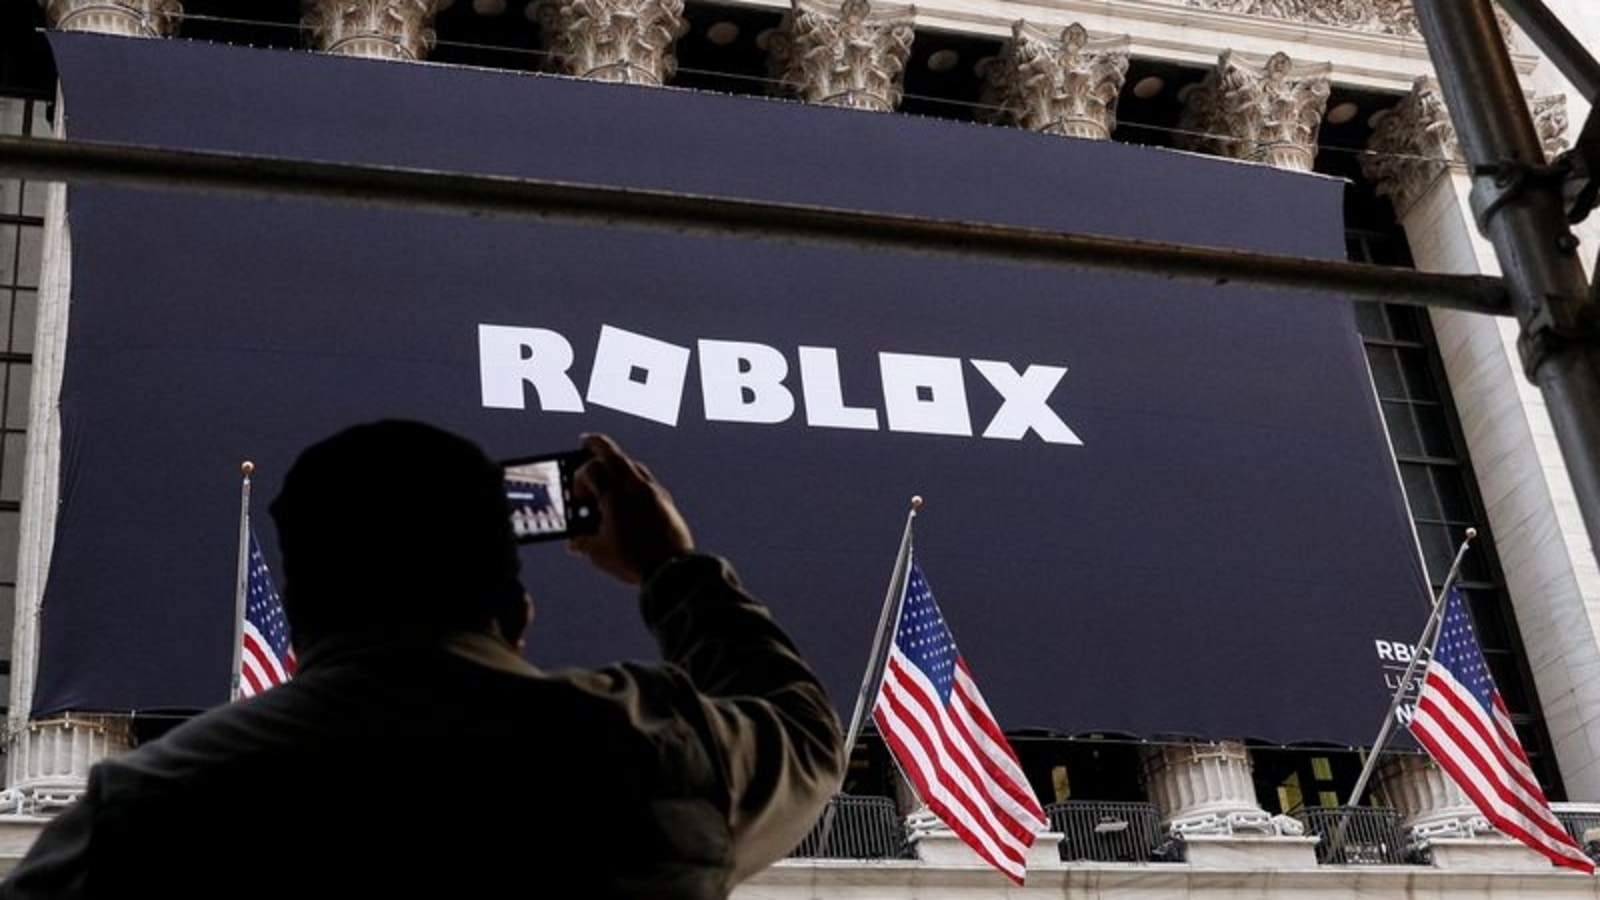 WowWee Statement in Response to Roblox Lawsuit